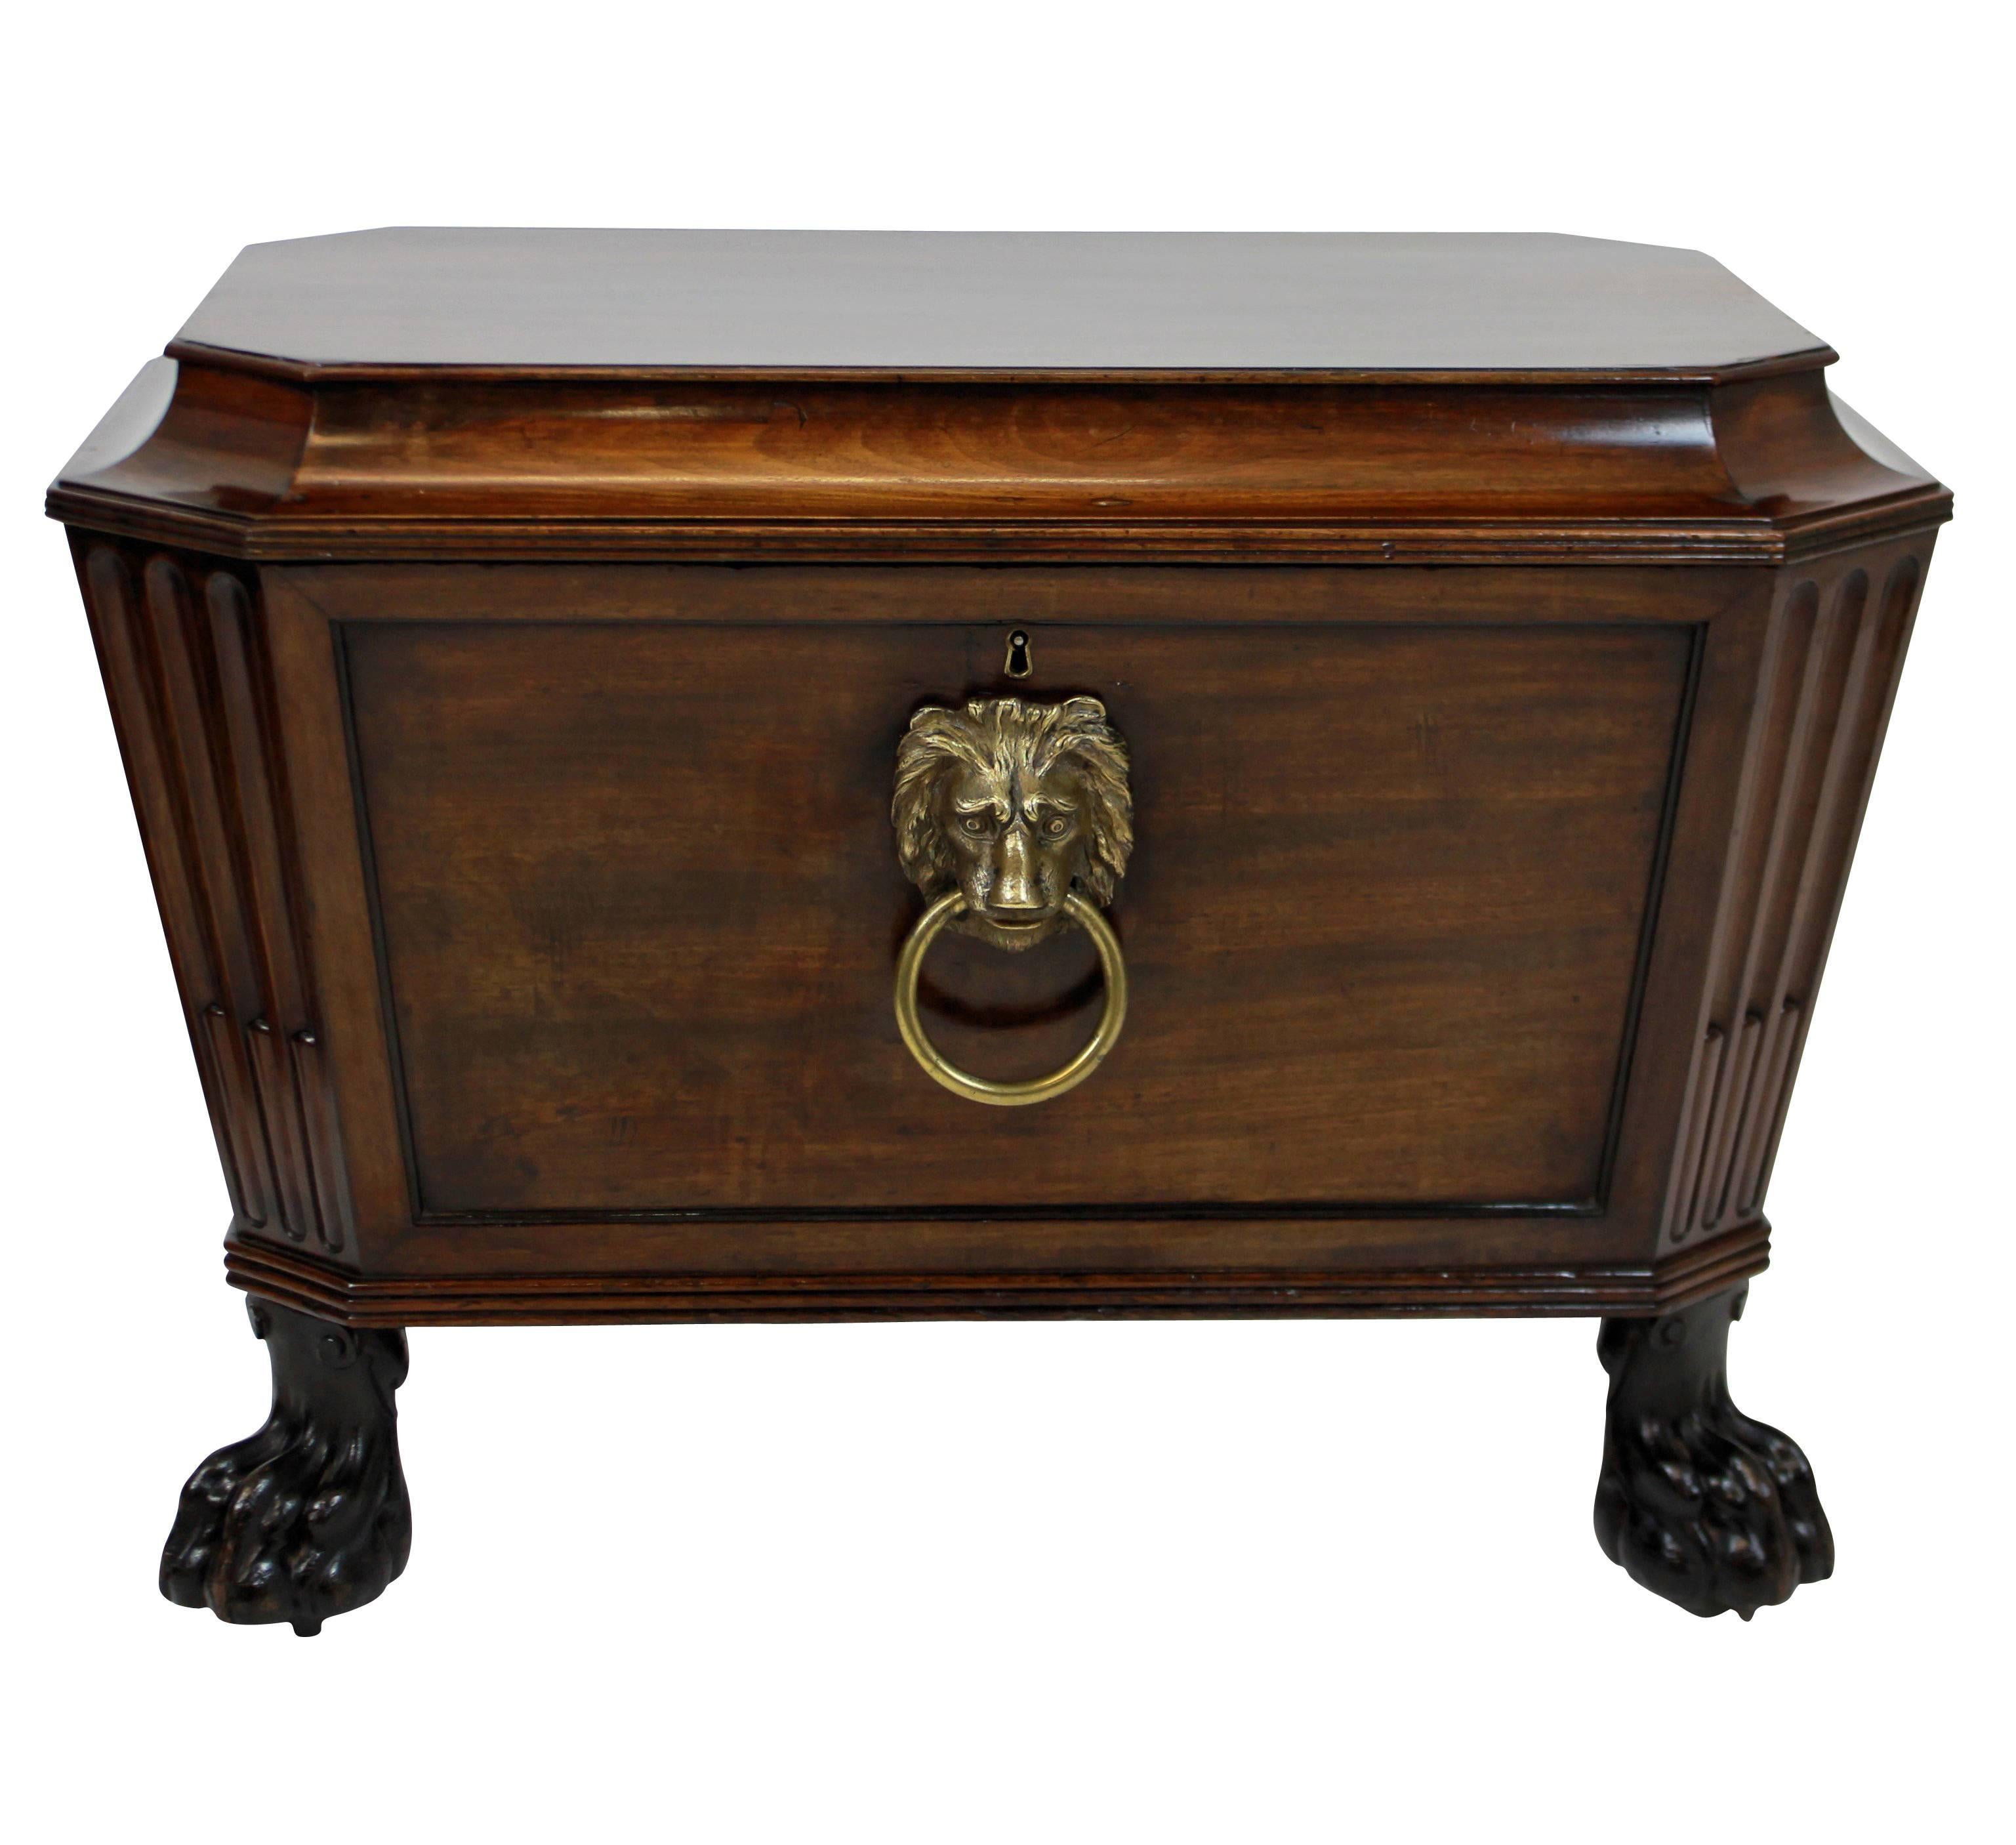 A pair of large English Country House wine coolers or cellarettes in the manner of Thomas Hope. Their quality and condition is rare, given their age. The Cuban mahogany sarcophagus cases are beautifully executed, with lion paw feet and hidden